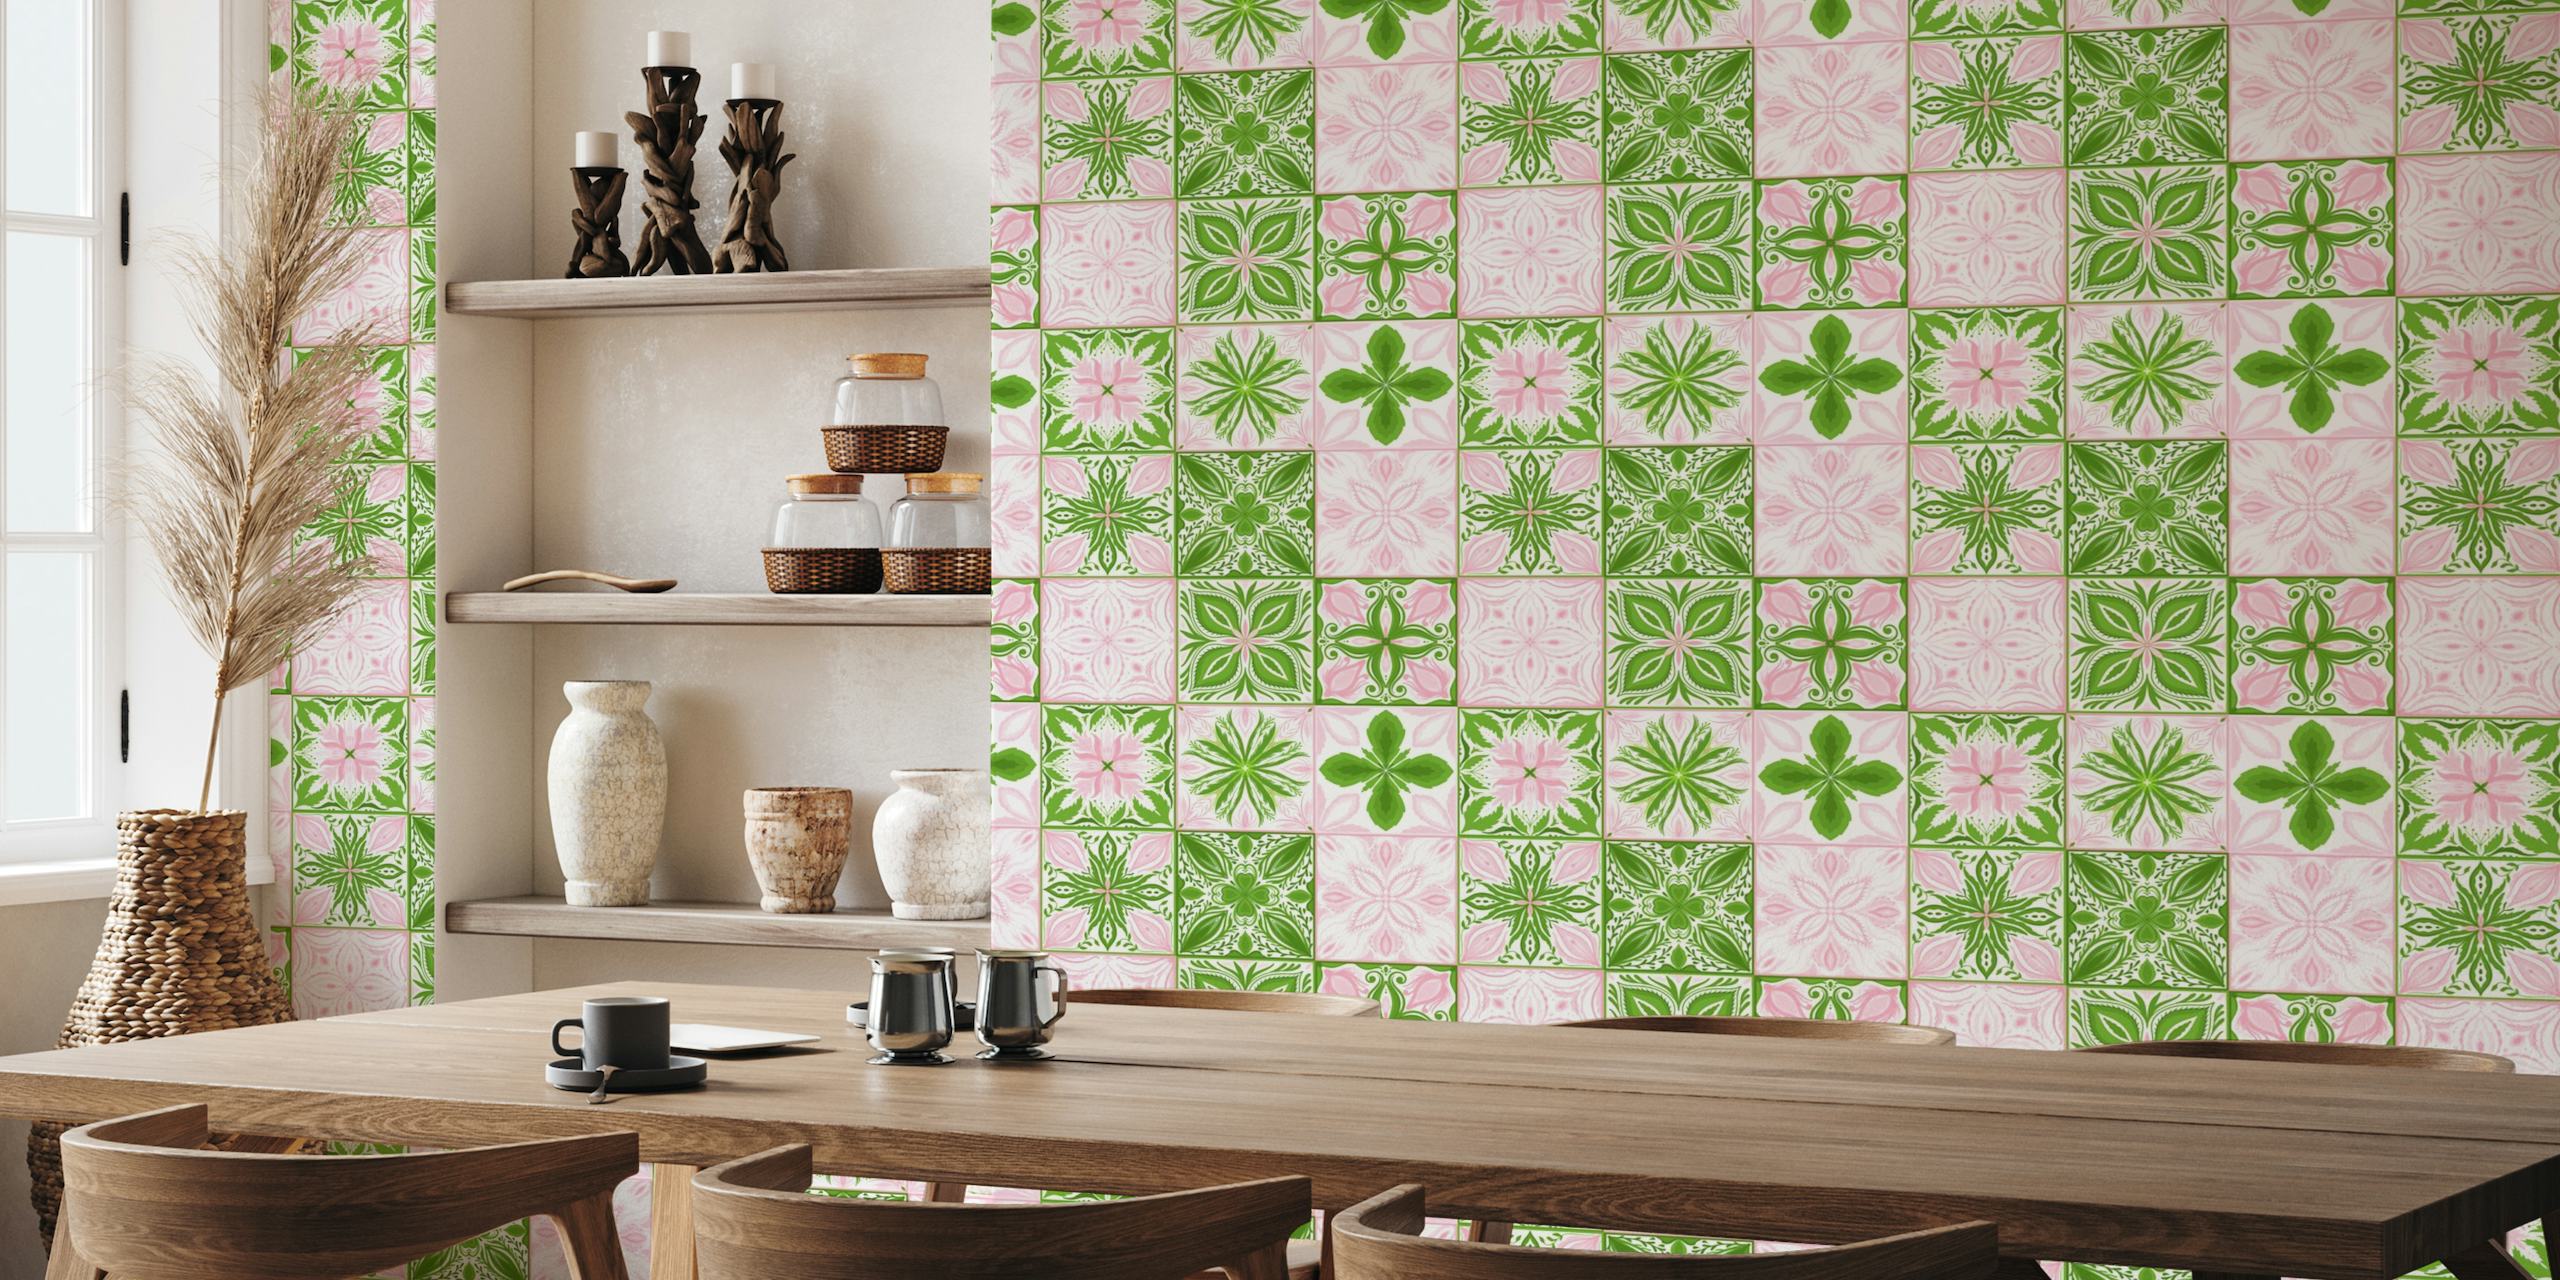 Ornate tiles in pink and green behang